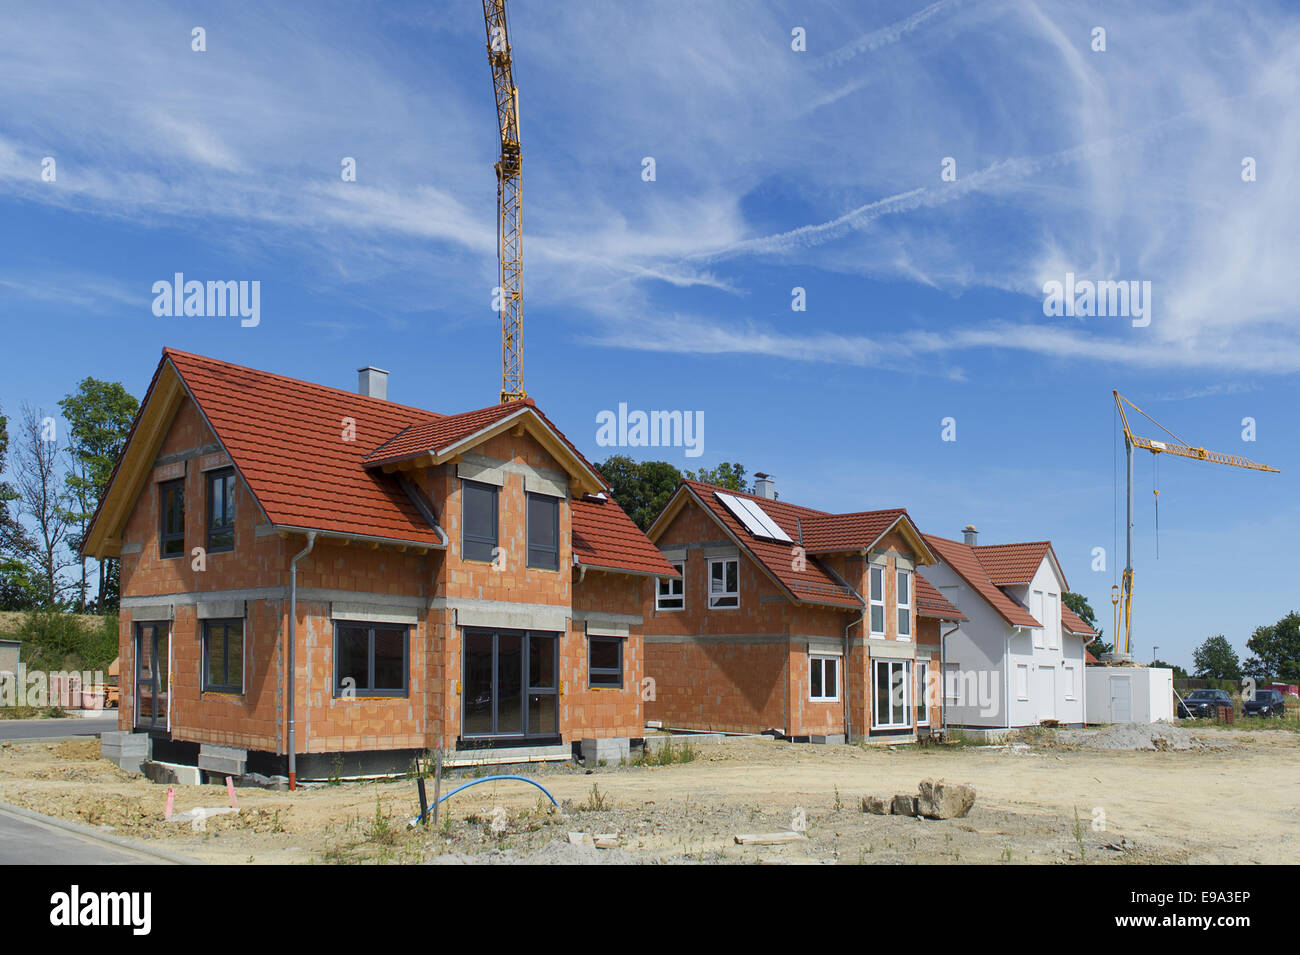 Houses in a development area Stock Photo